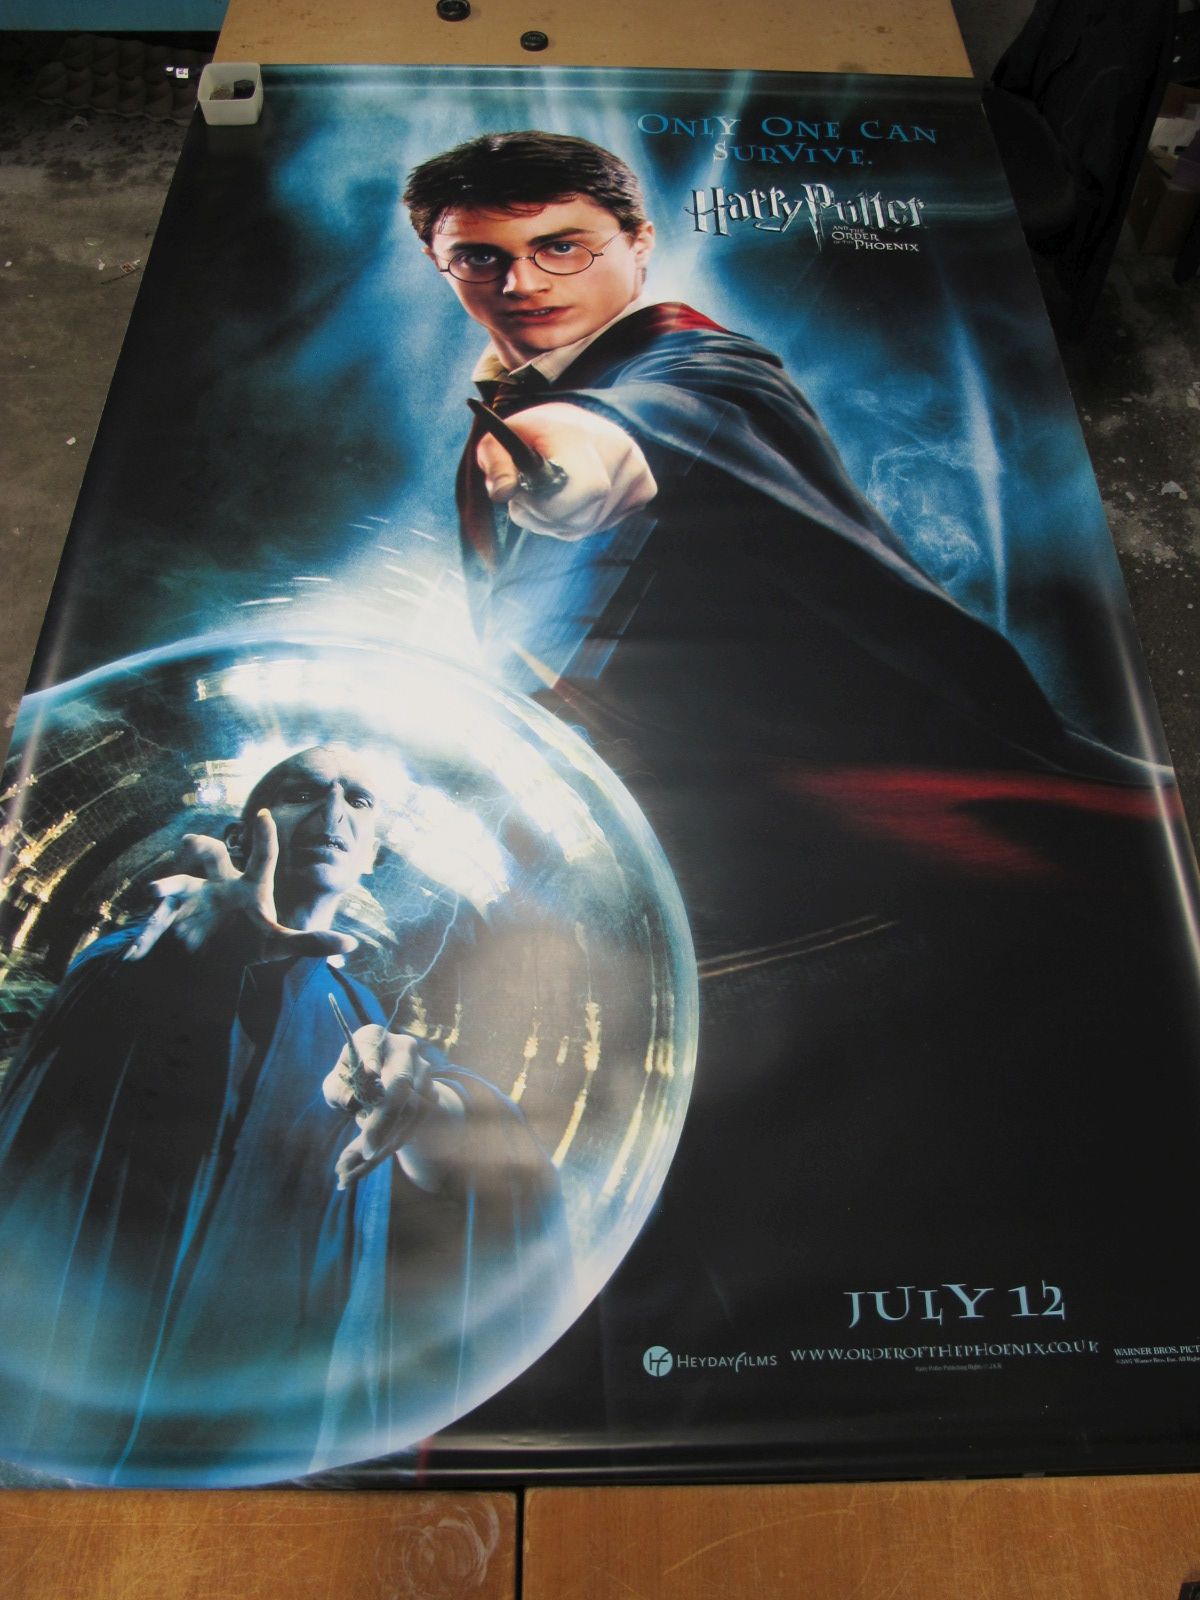 Harry Potter and The Order of The Phoenix Large Lobby Poster featuring Harry with Wand, July 12